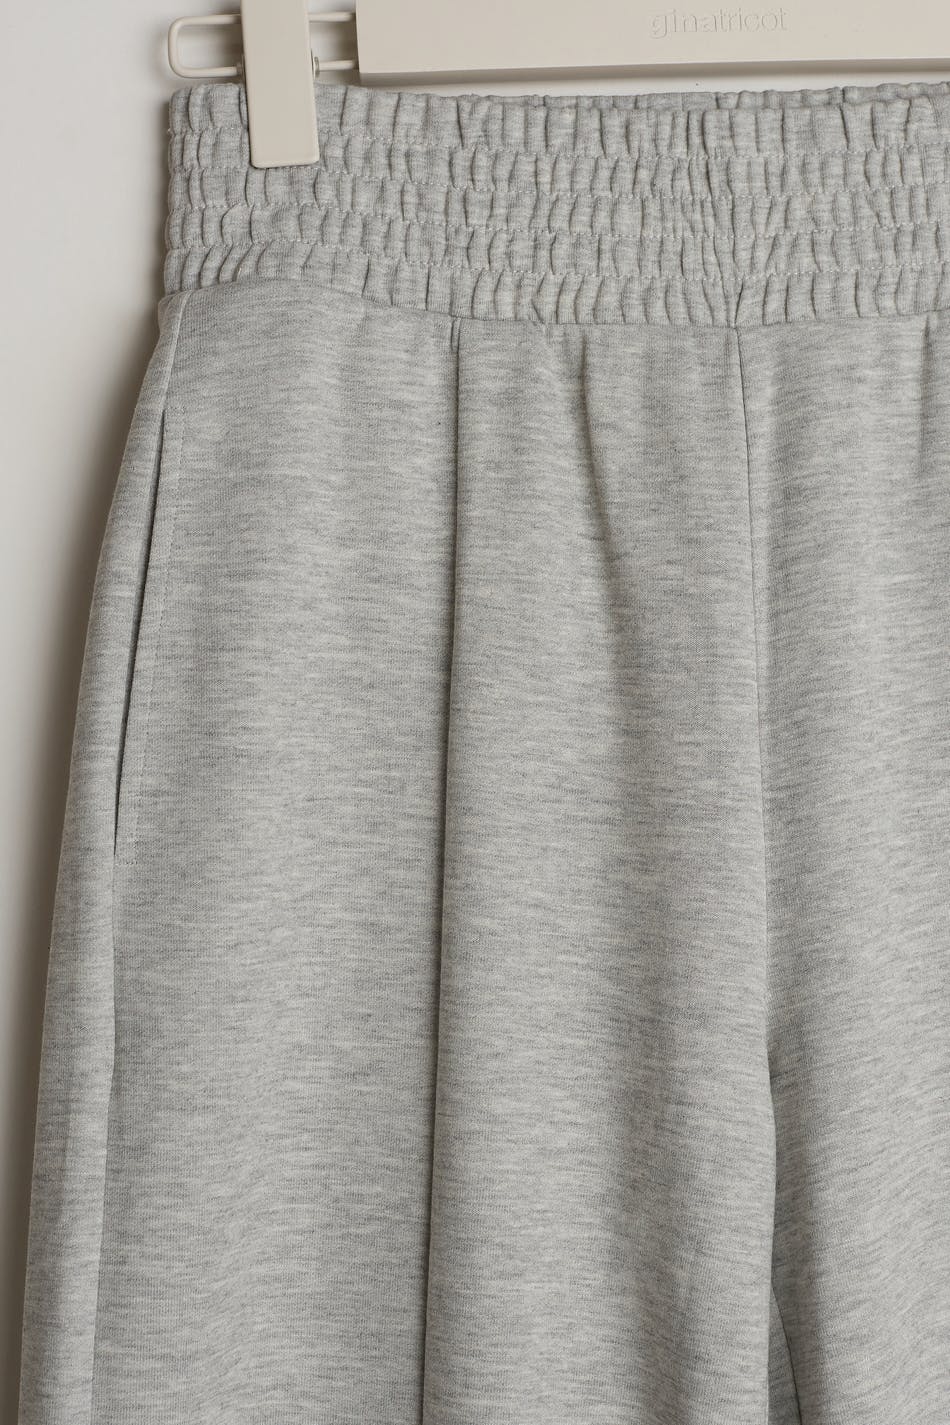 Ik heb een contract gemaakt Tether Brawl Louise petite trousers - Gina Tricot